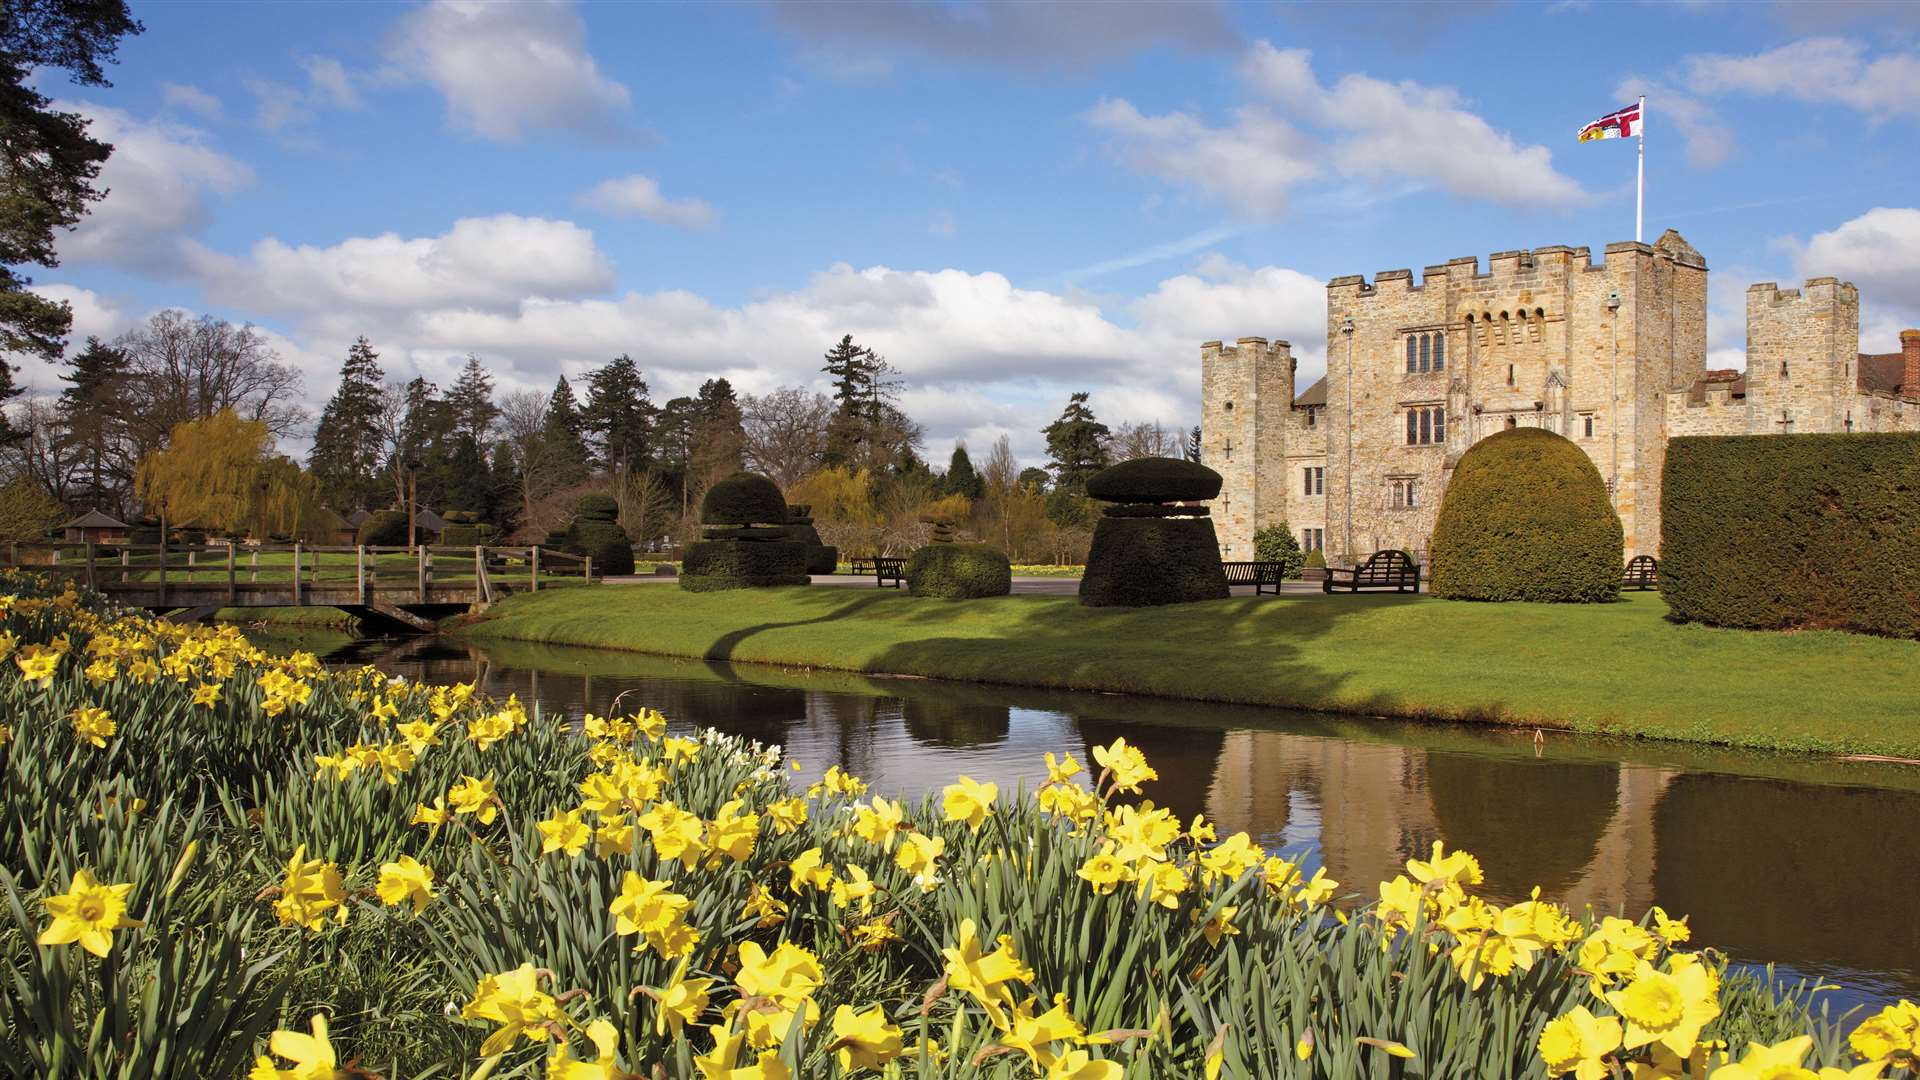 Dazzling Daffodils with Johnny Walkers will be launched next March for the first time at Hever